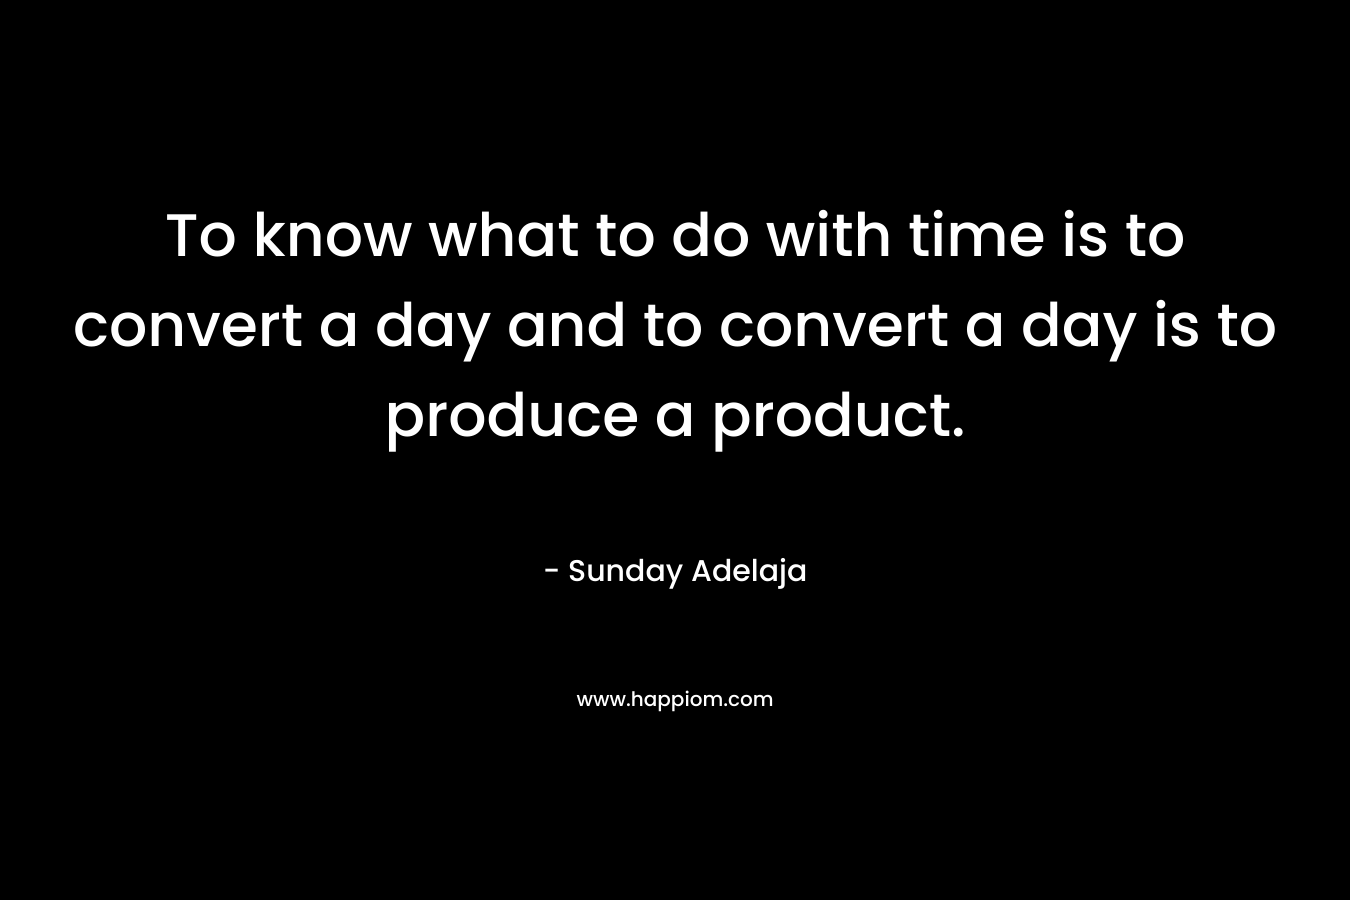 To know what to do with time is to convert a day and to convert a day is to produce a product.